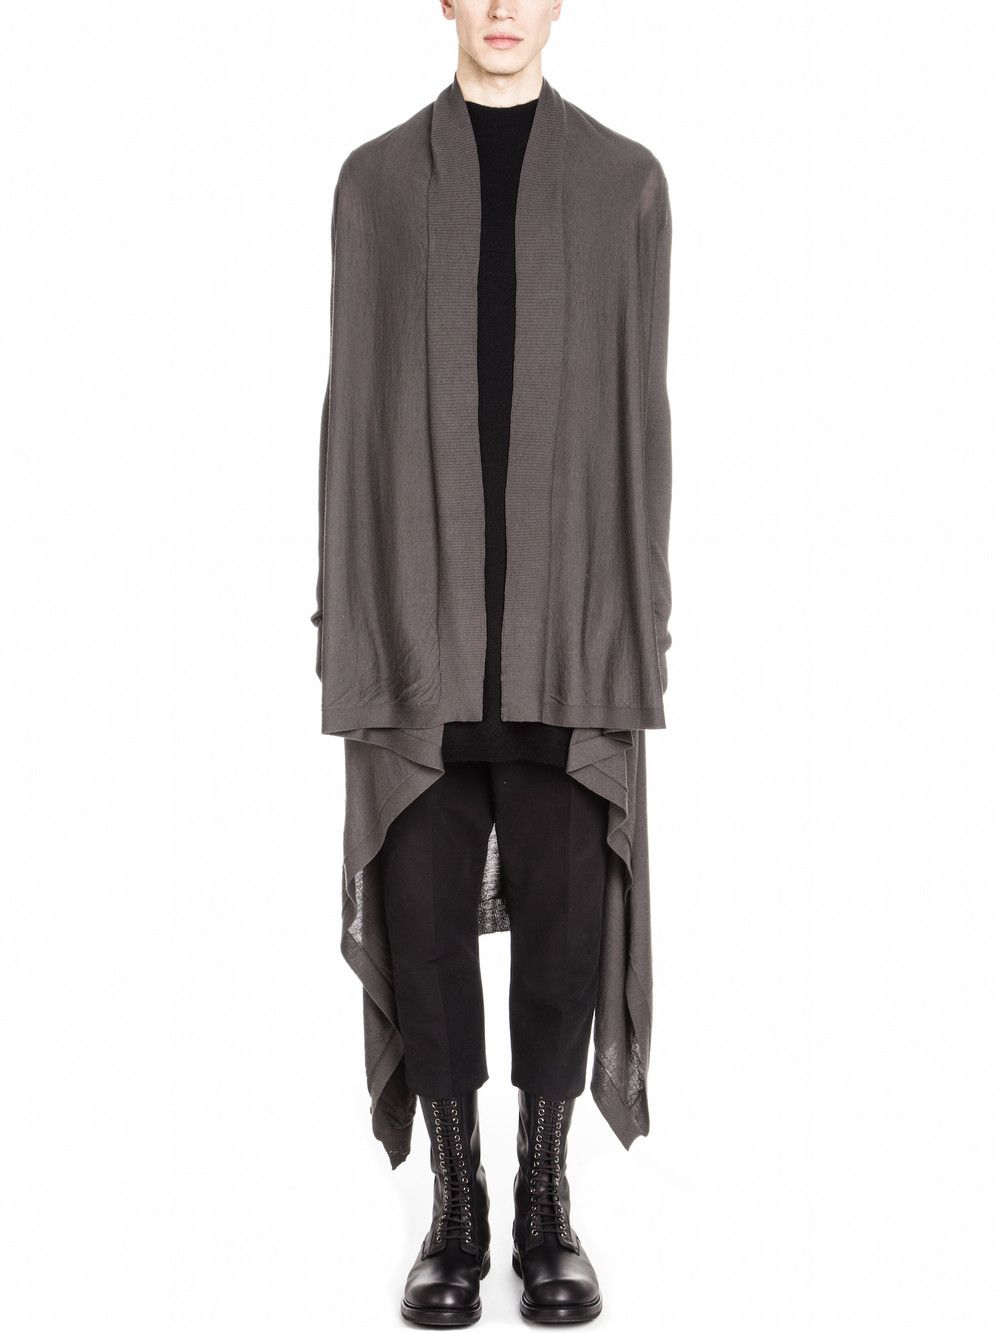 Rick Owens Brand New FW16 Long Cardigan Size US M / EU 48-50 / 2 - 2 Preview